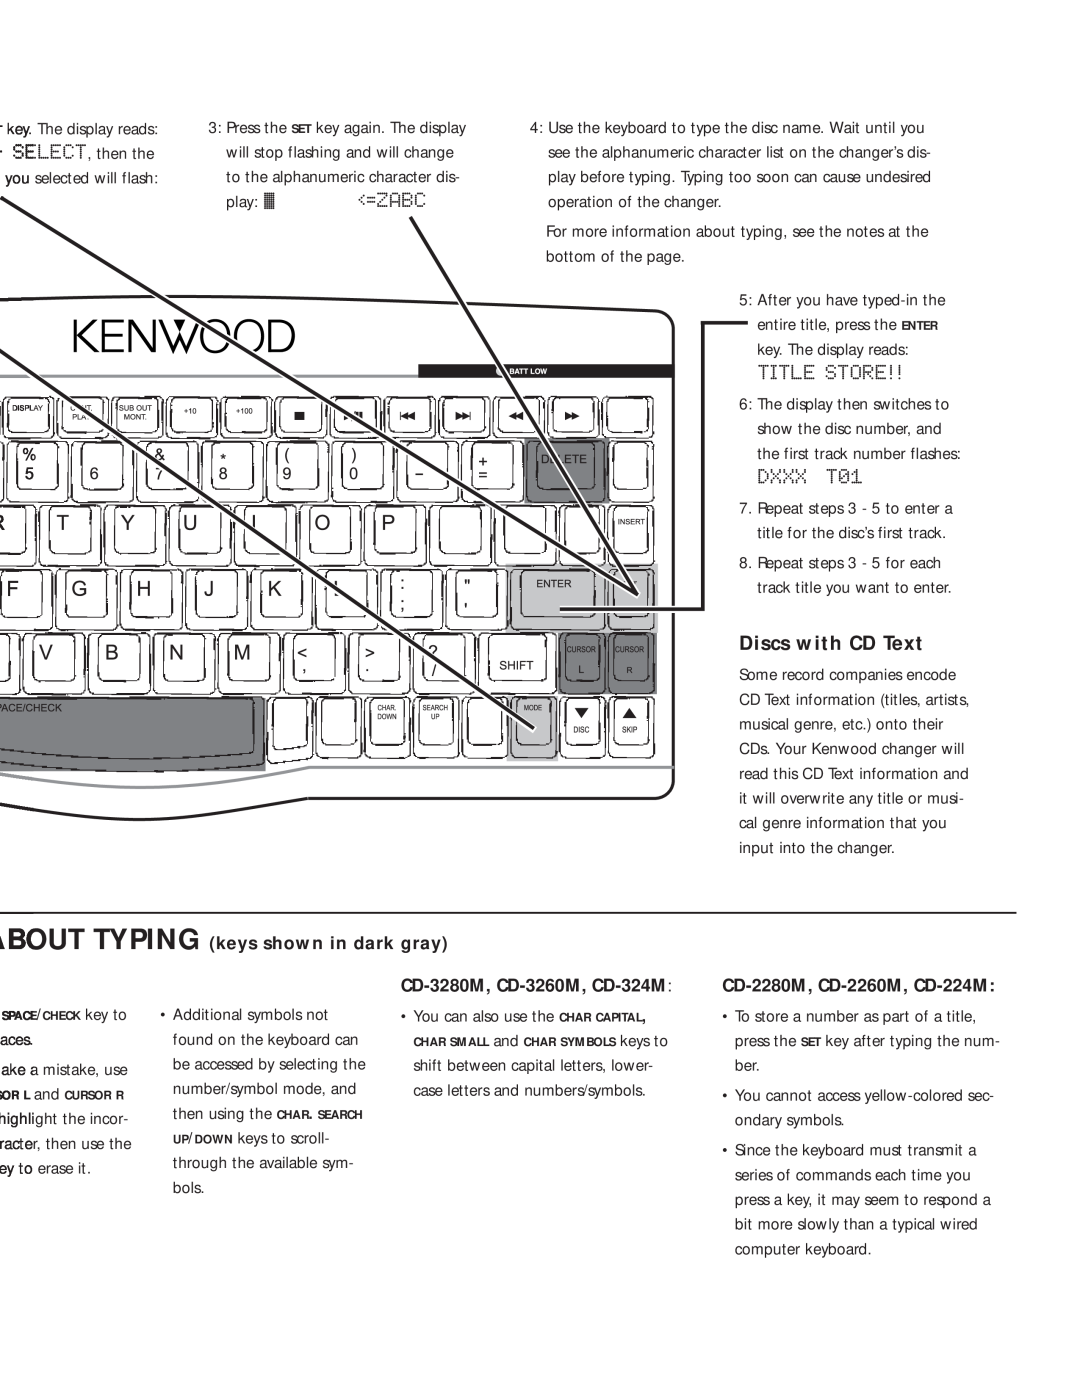 Kenwood KB-IR1 instruction manual =Zabc, Title Store, DXXX T01, Discs with CD Text, ABOUT TYPING keys shown in dark gray 